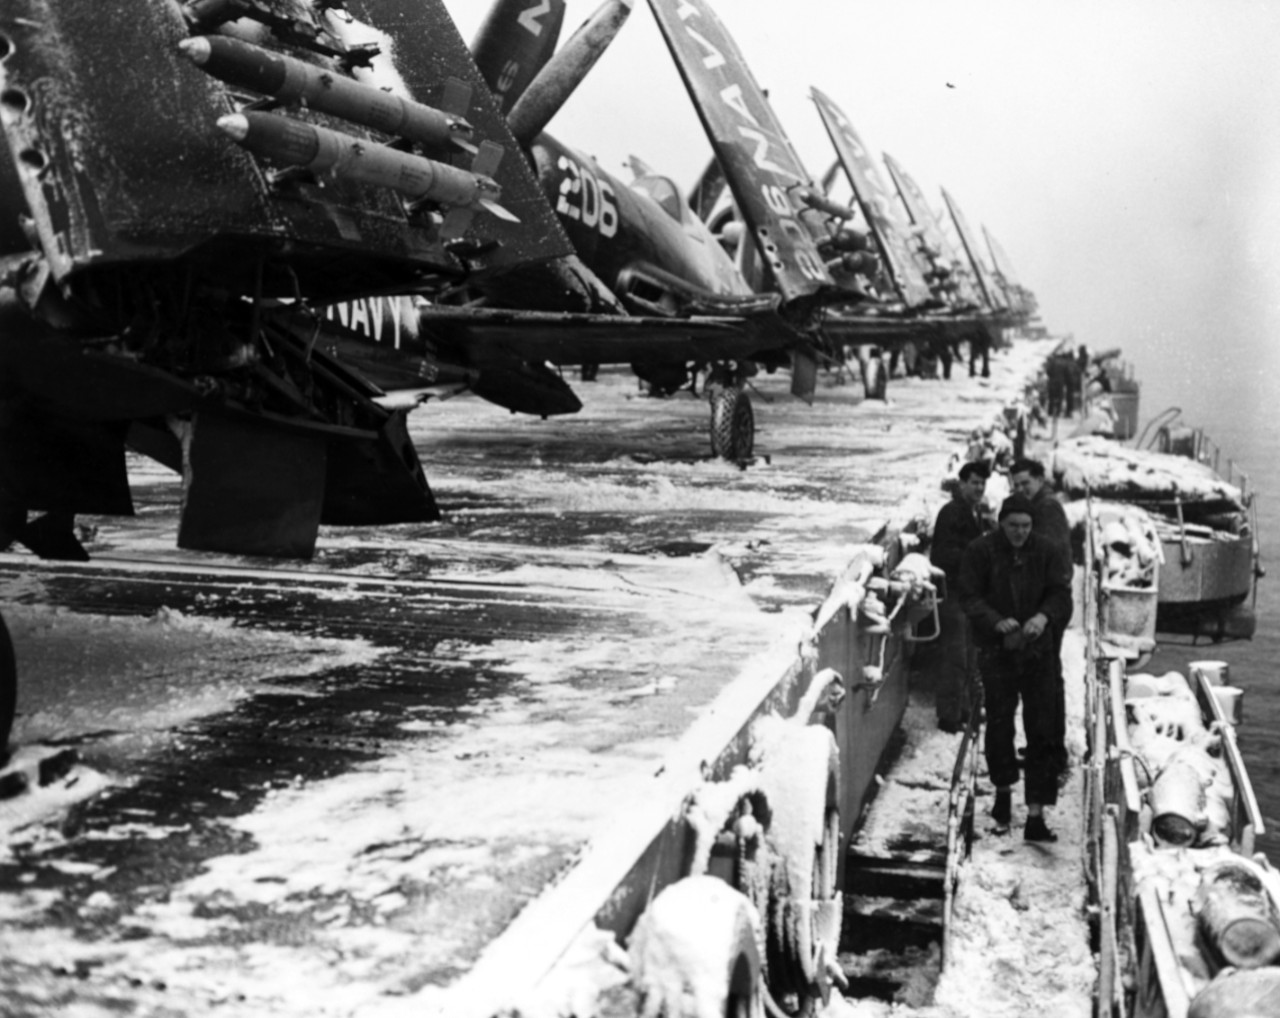 The ships of the task force fight in bitter winter weather but crewmen take a break and participate in a snowball fight while clearing snow from Valley Forge’s flight deck in Korean waters, early 1951. The planes parked on the deck are Vought F4F-4 Corsairs of Carrier Air Group (CVG) 2. (U.S. Navy Photograph 80-G-428270, National Archives and Records Administration, Still Pictures Branch, College Park, Md.)